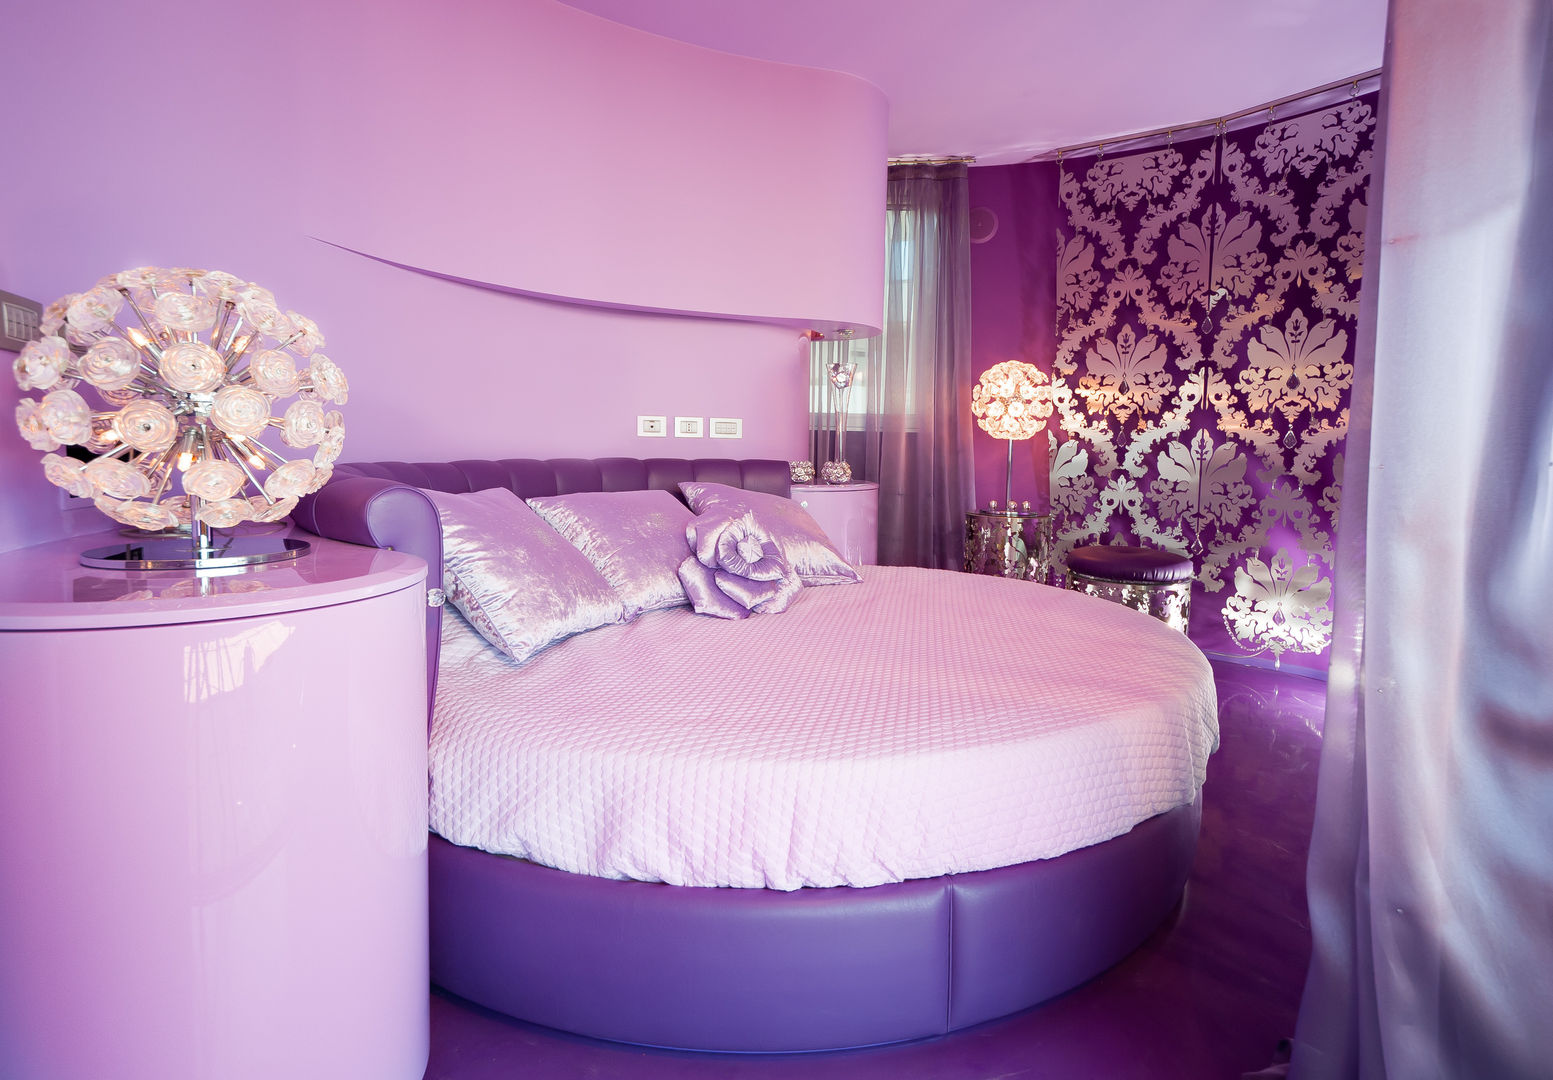 LADY ROSE, STUDIO CERON & CERON STUDIO CERON & CERON Eclectic style bedroom